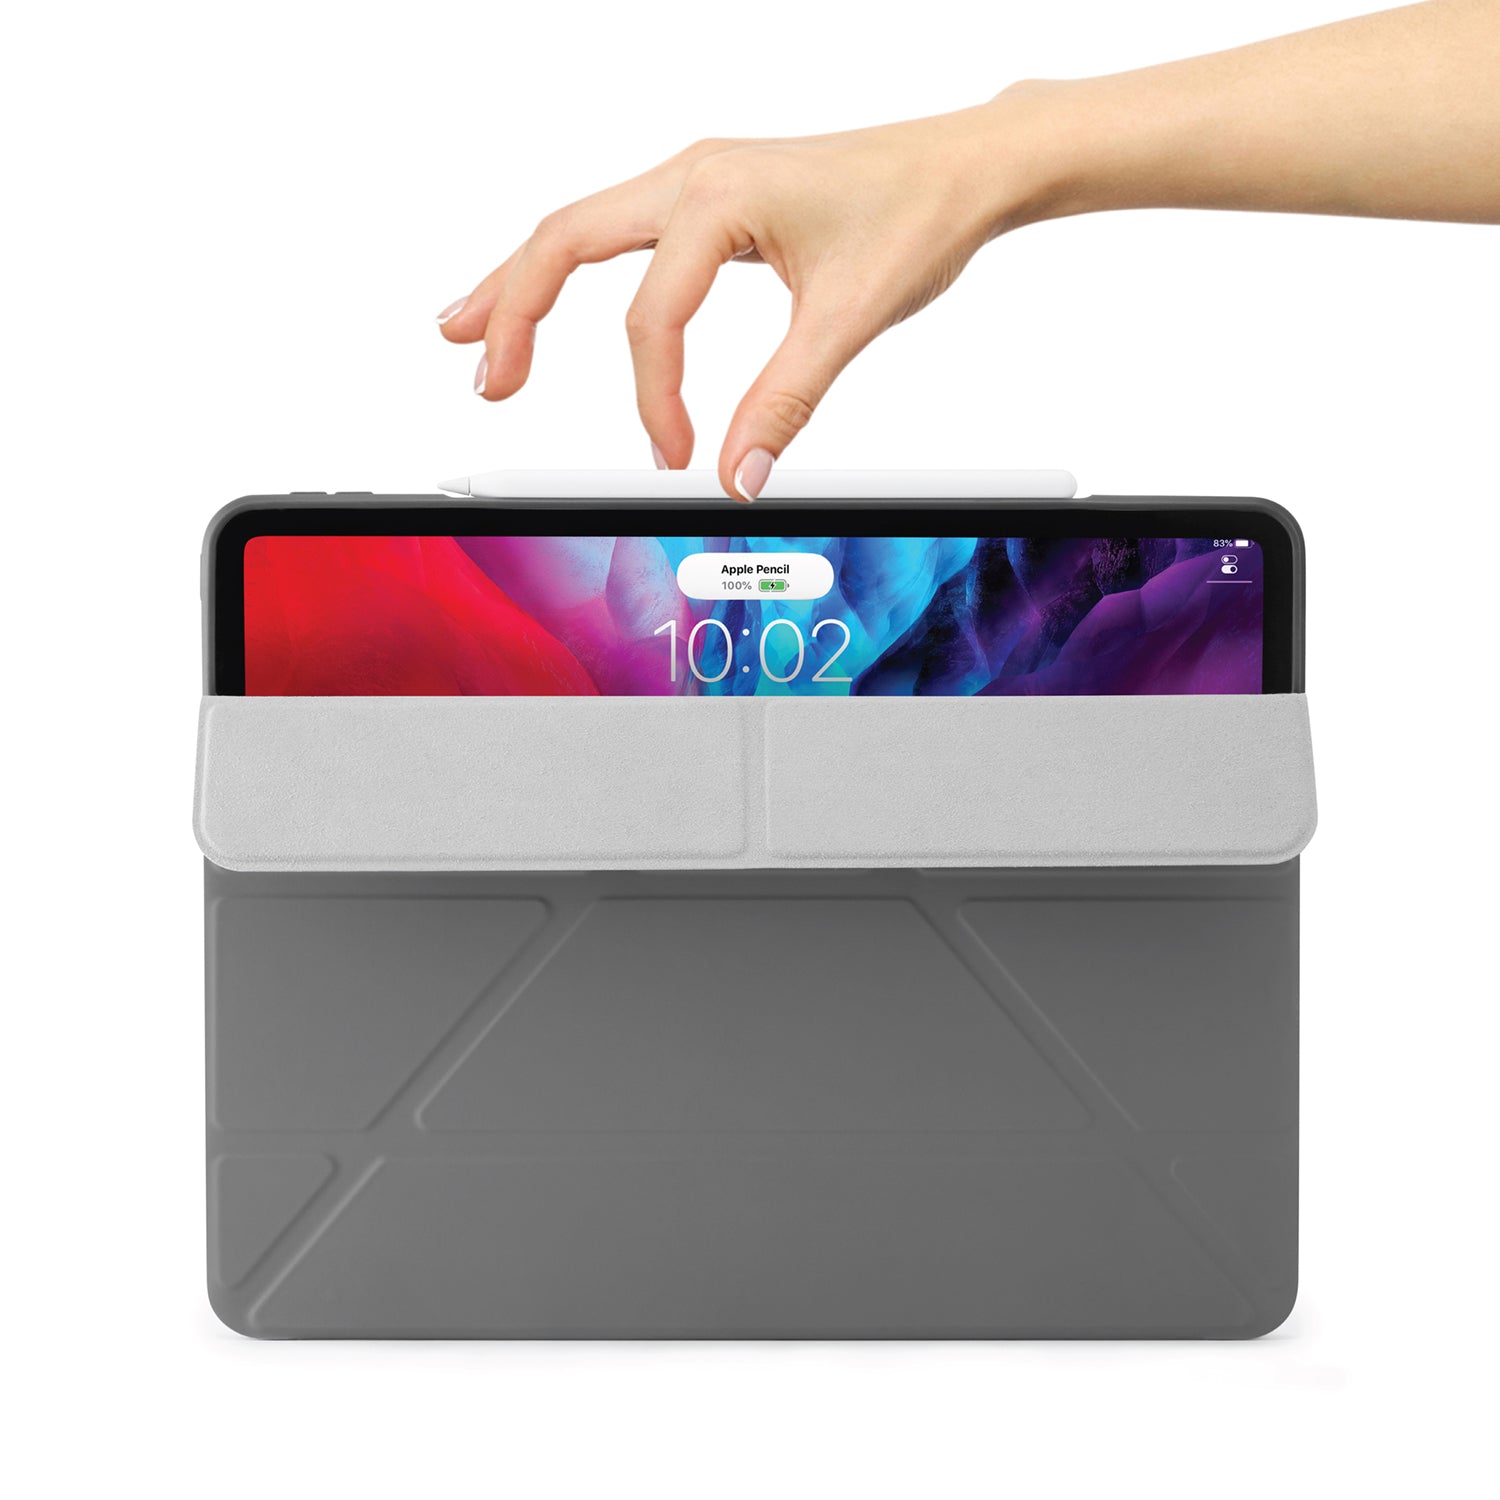 Pipetto iPad Air 3 / Pro 10.5 Case, Shockproof TPU Origami 5-in-1 Smart  Cover Apple Pencil Sync & Charge